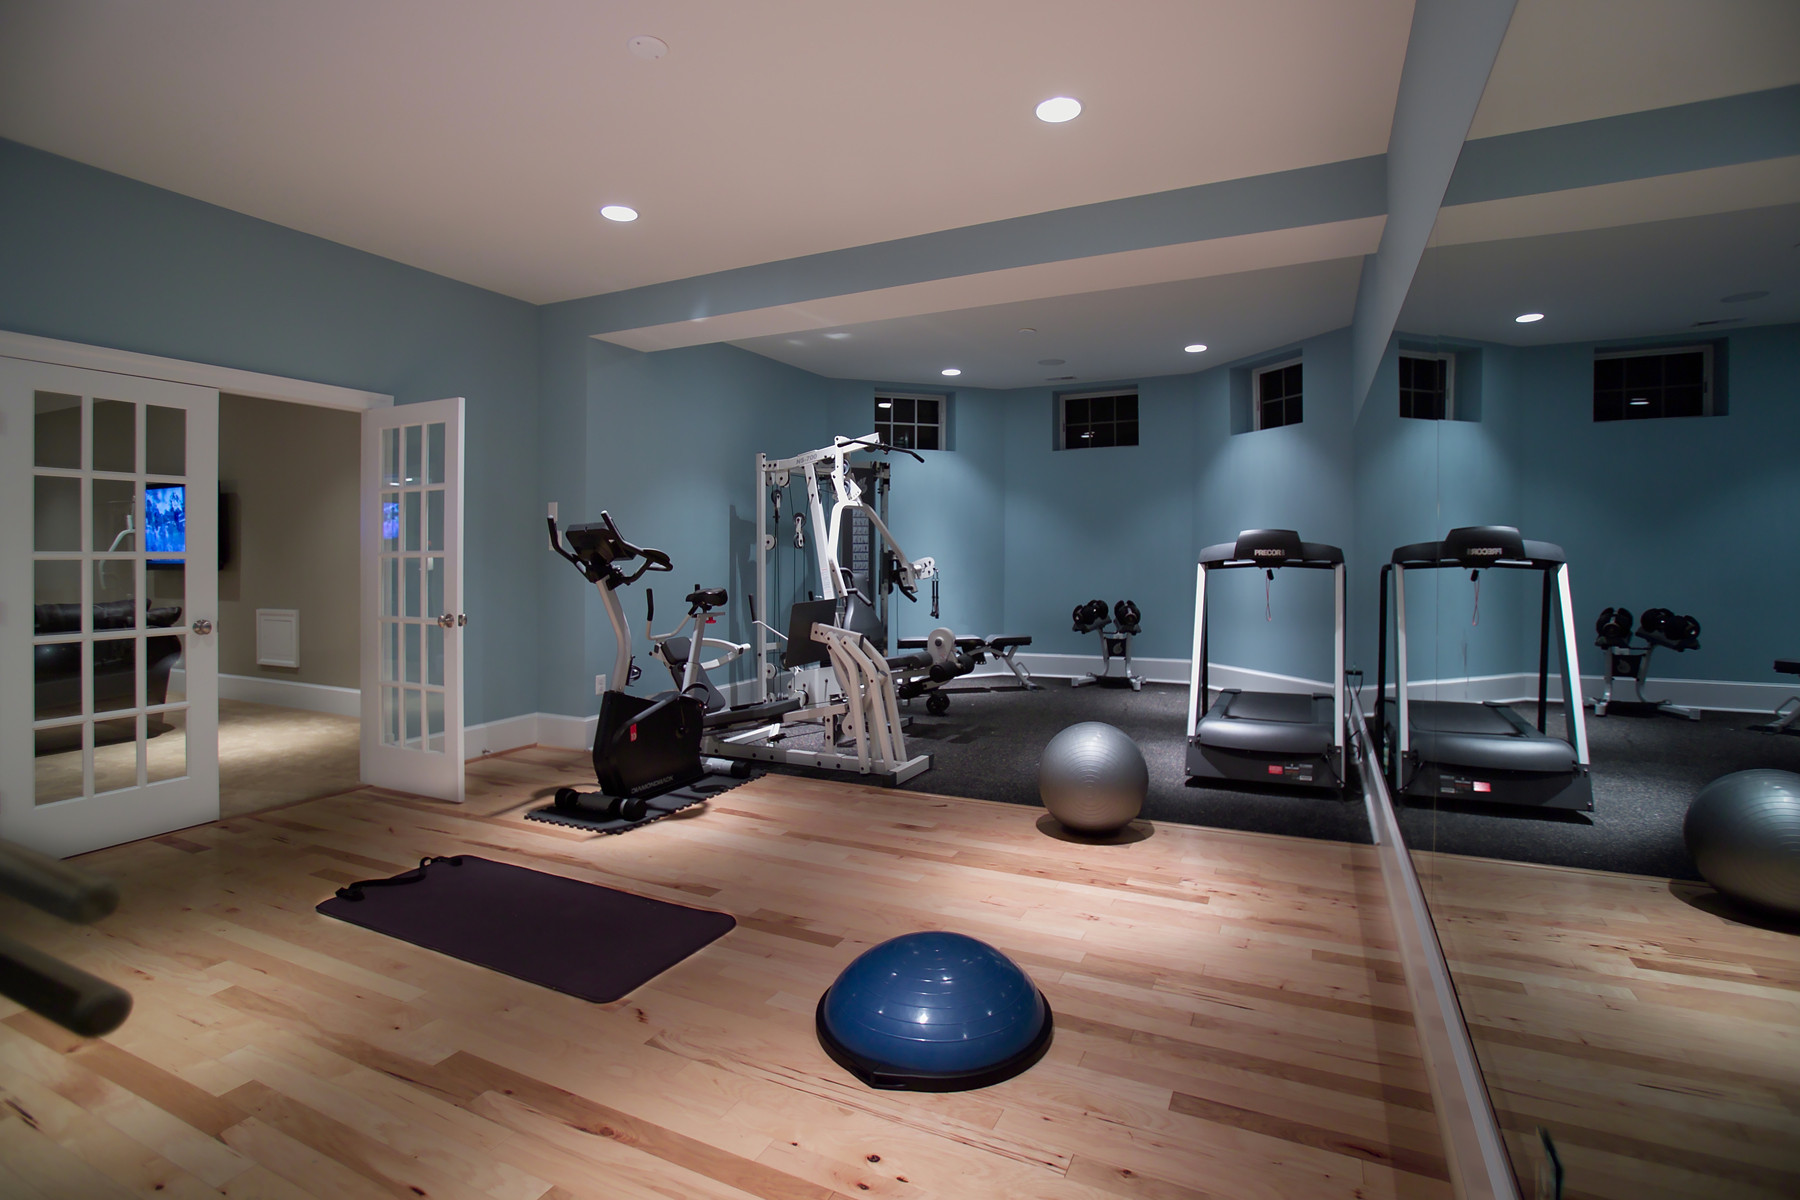 Gym Design Ideas, Pictures, Remodel and Decor  Gym room at home, Home gym  decor, Workout room home